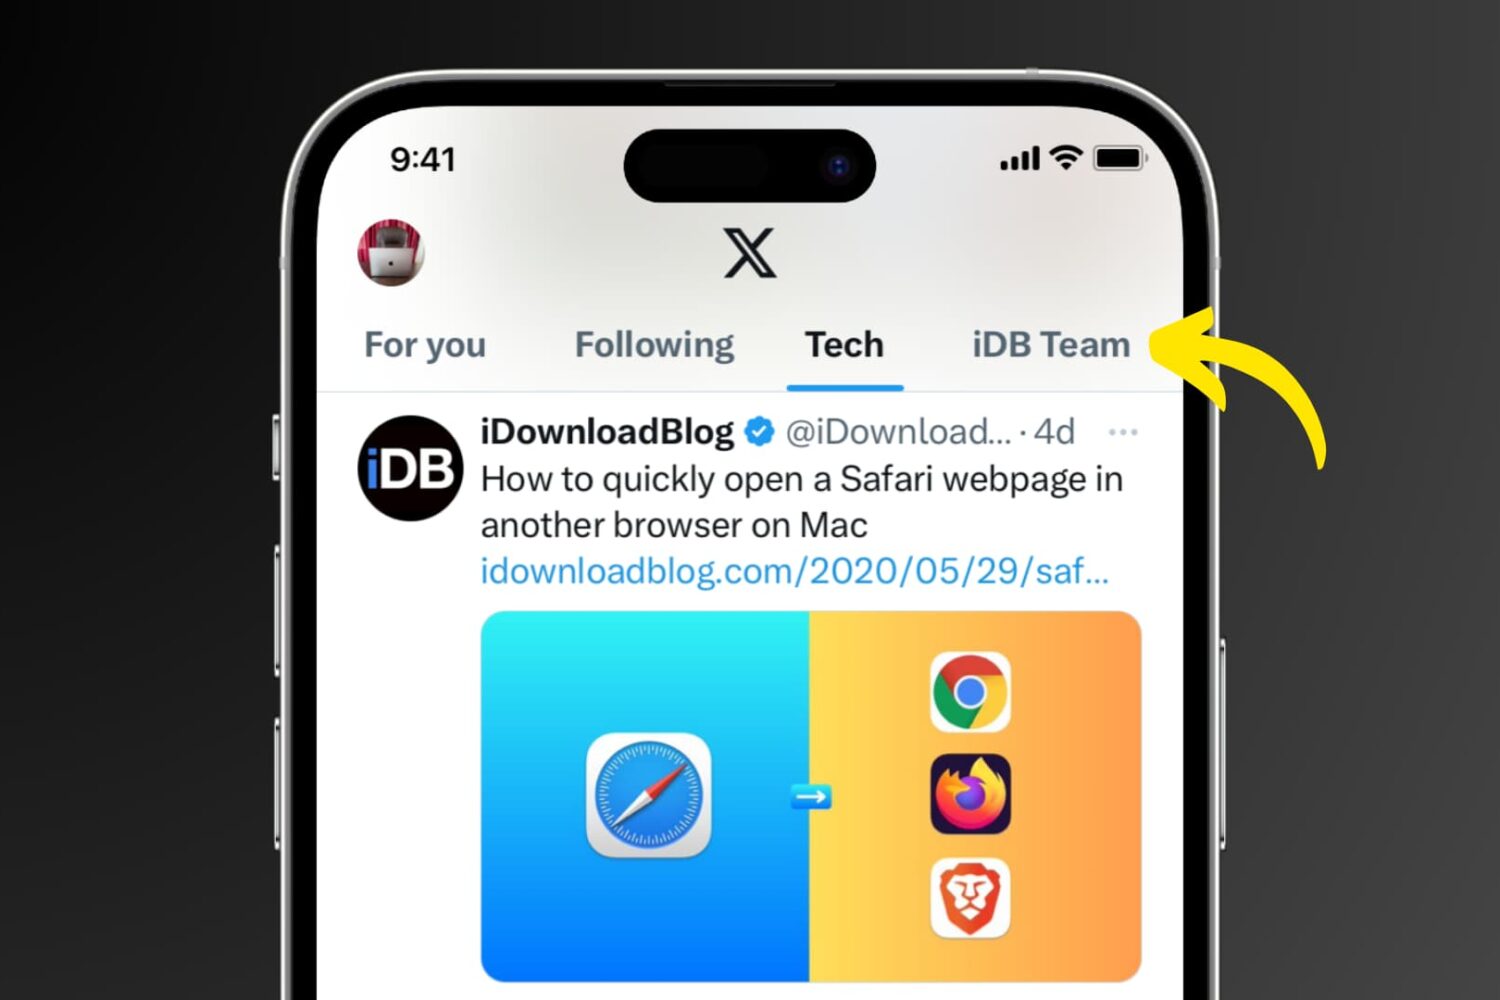 Twitter List pinned at the top of the X app on iPhone